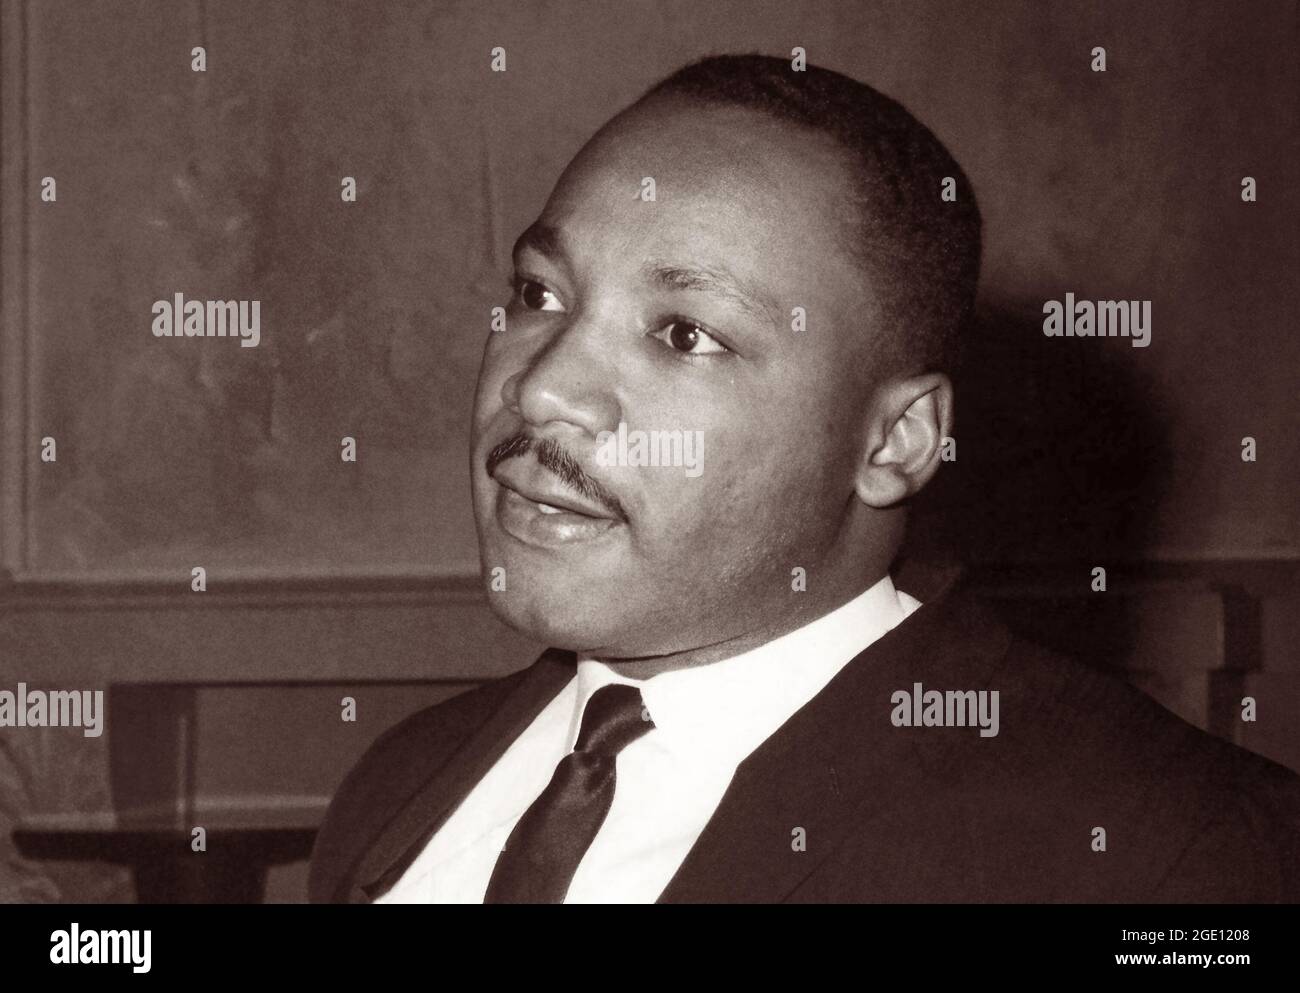 Martin Luther King, Jr. in 1963. (USA) Stock Photo